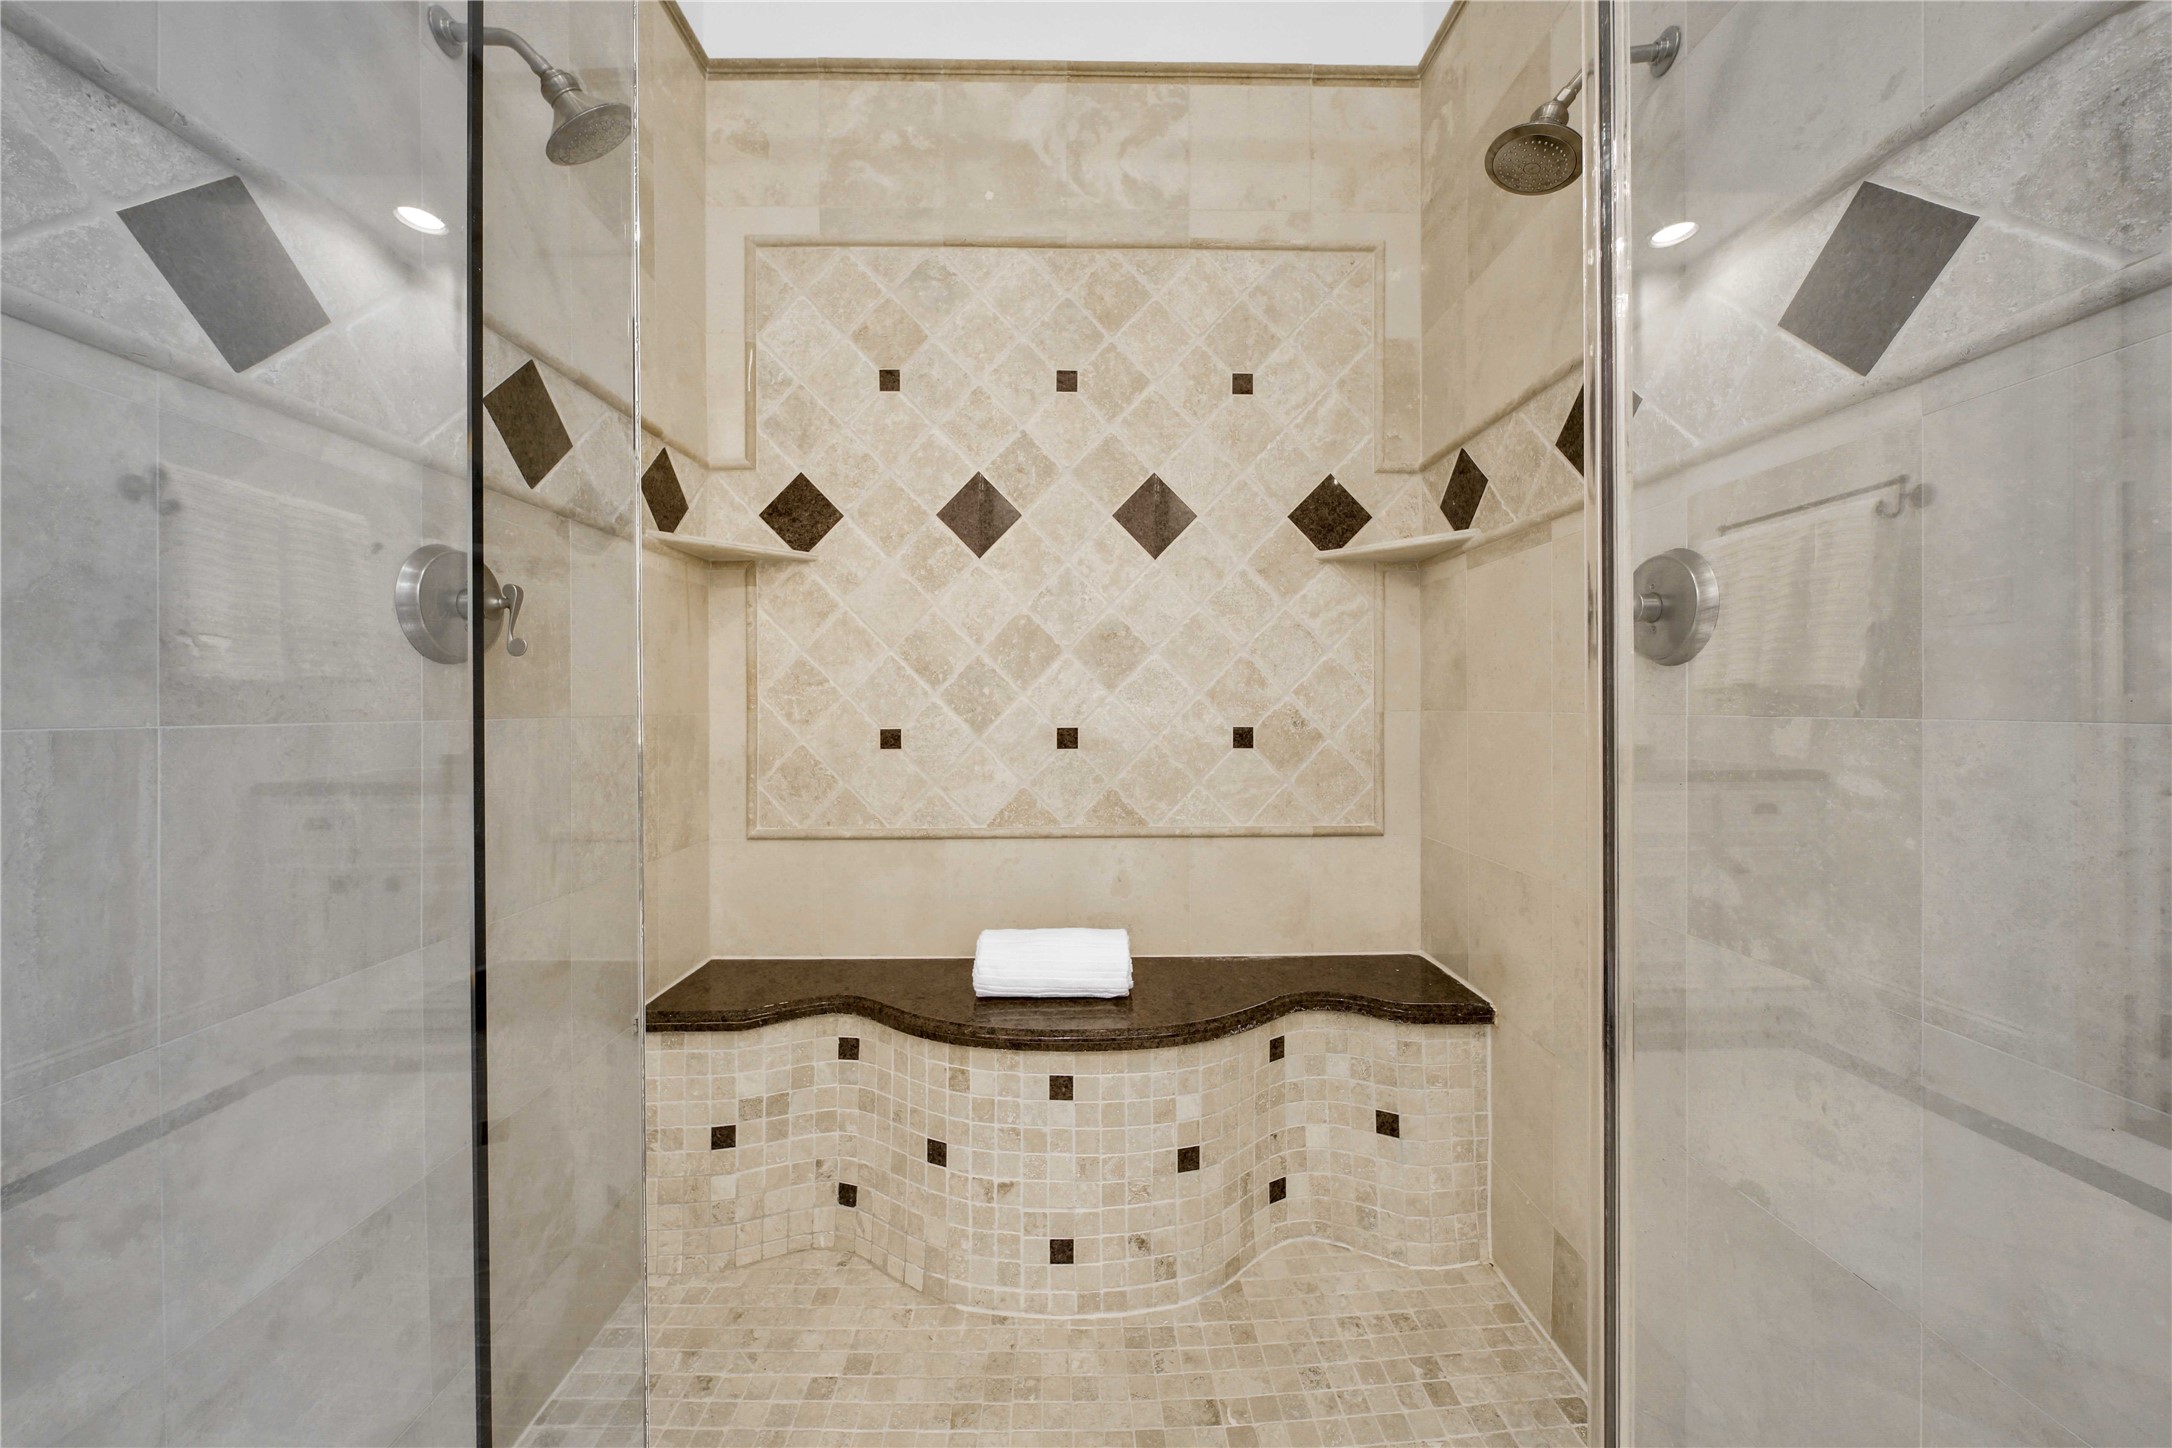 Imagine stepping into your personal oasis, where soothing water cascades from various angles, enveloping you in a rainfall-like sensation. Whether you prefer a gentle mist, a rejuvenating massage, or a combination of both, this shower has multiple sprays designed to indulge your senses and create a truly immersive experience.
